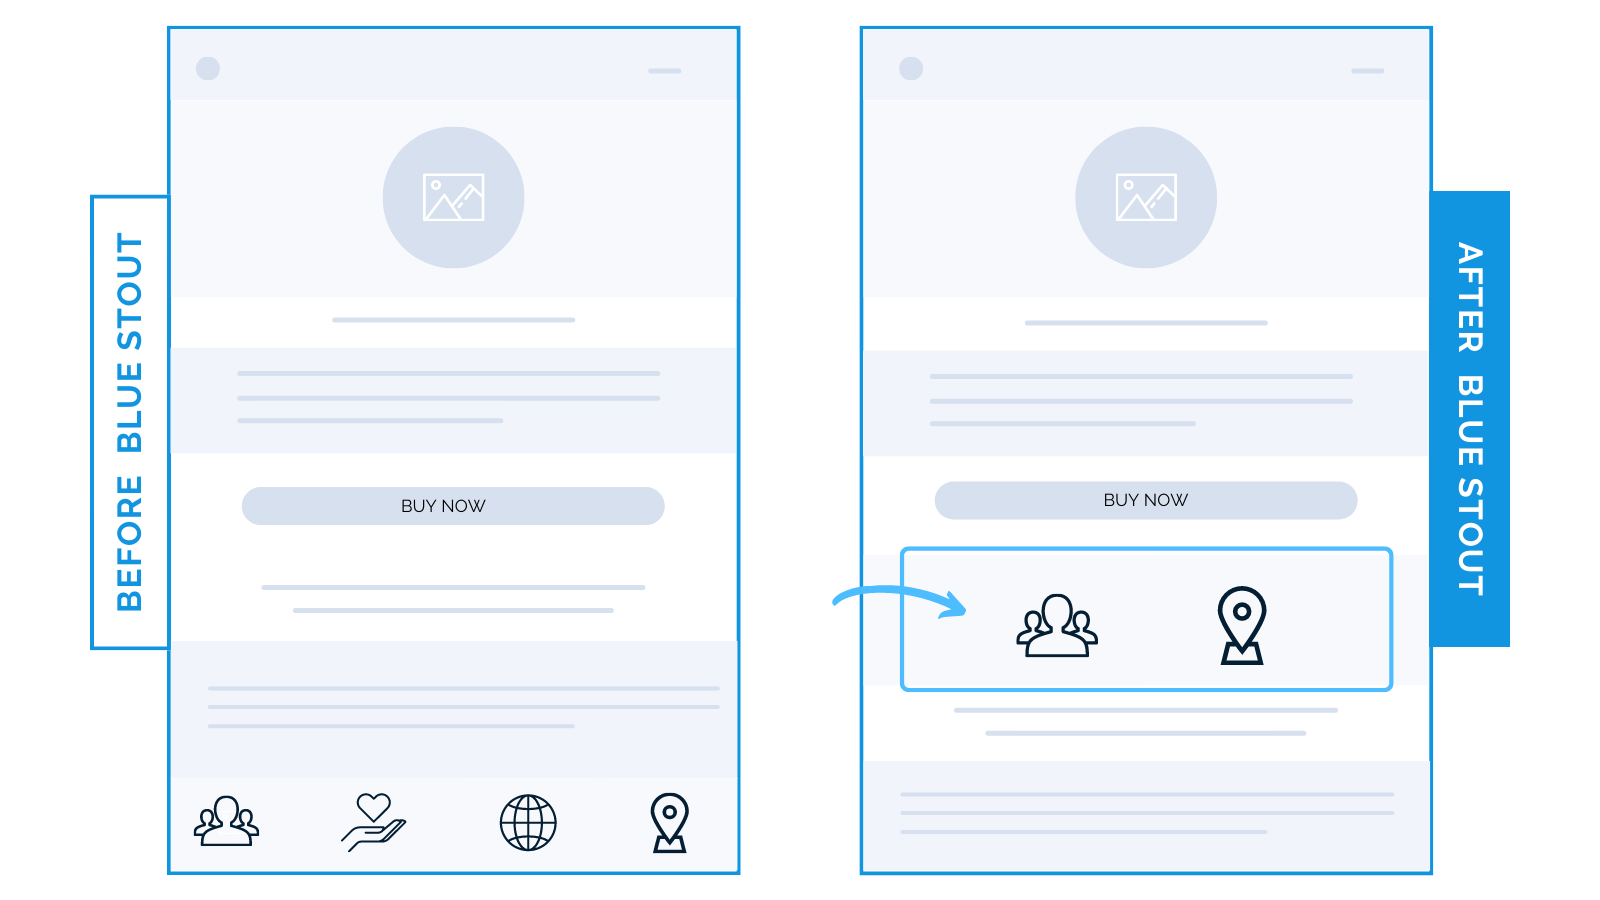 Lead with value. 2 design shifts for a high-converting product page